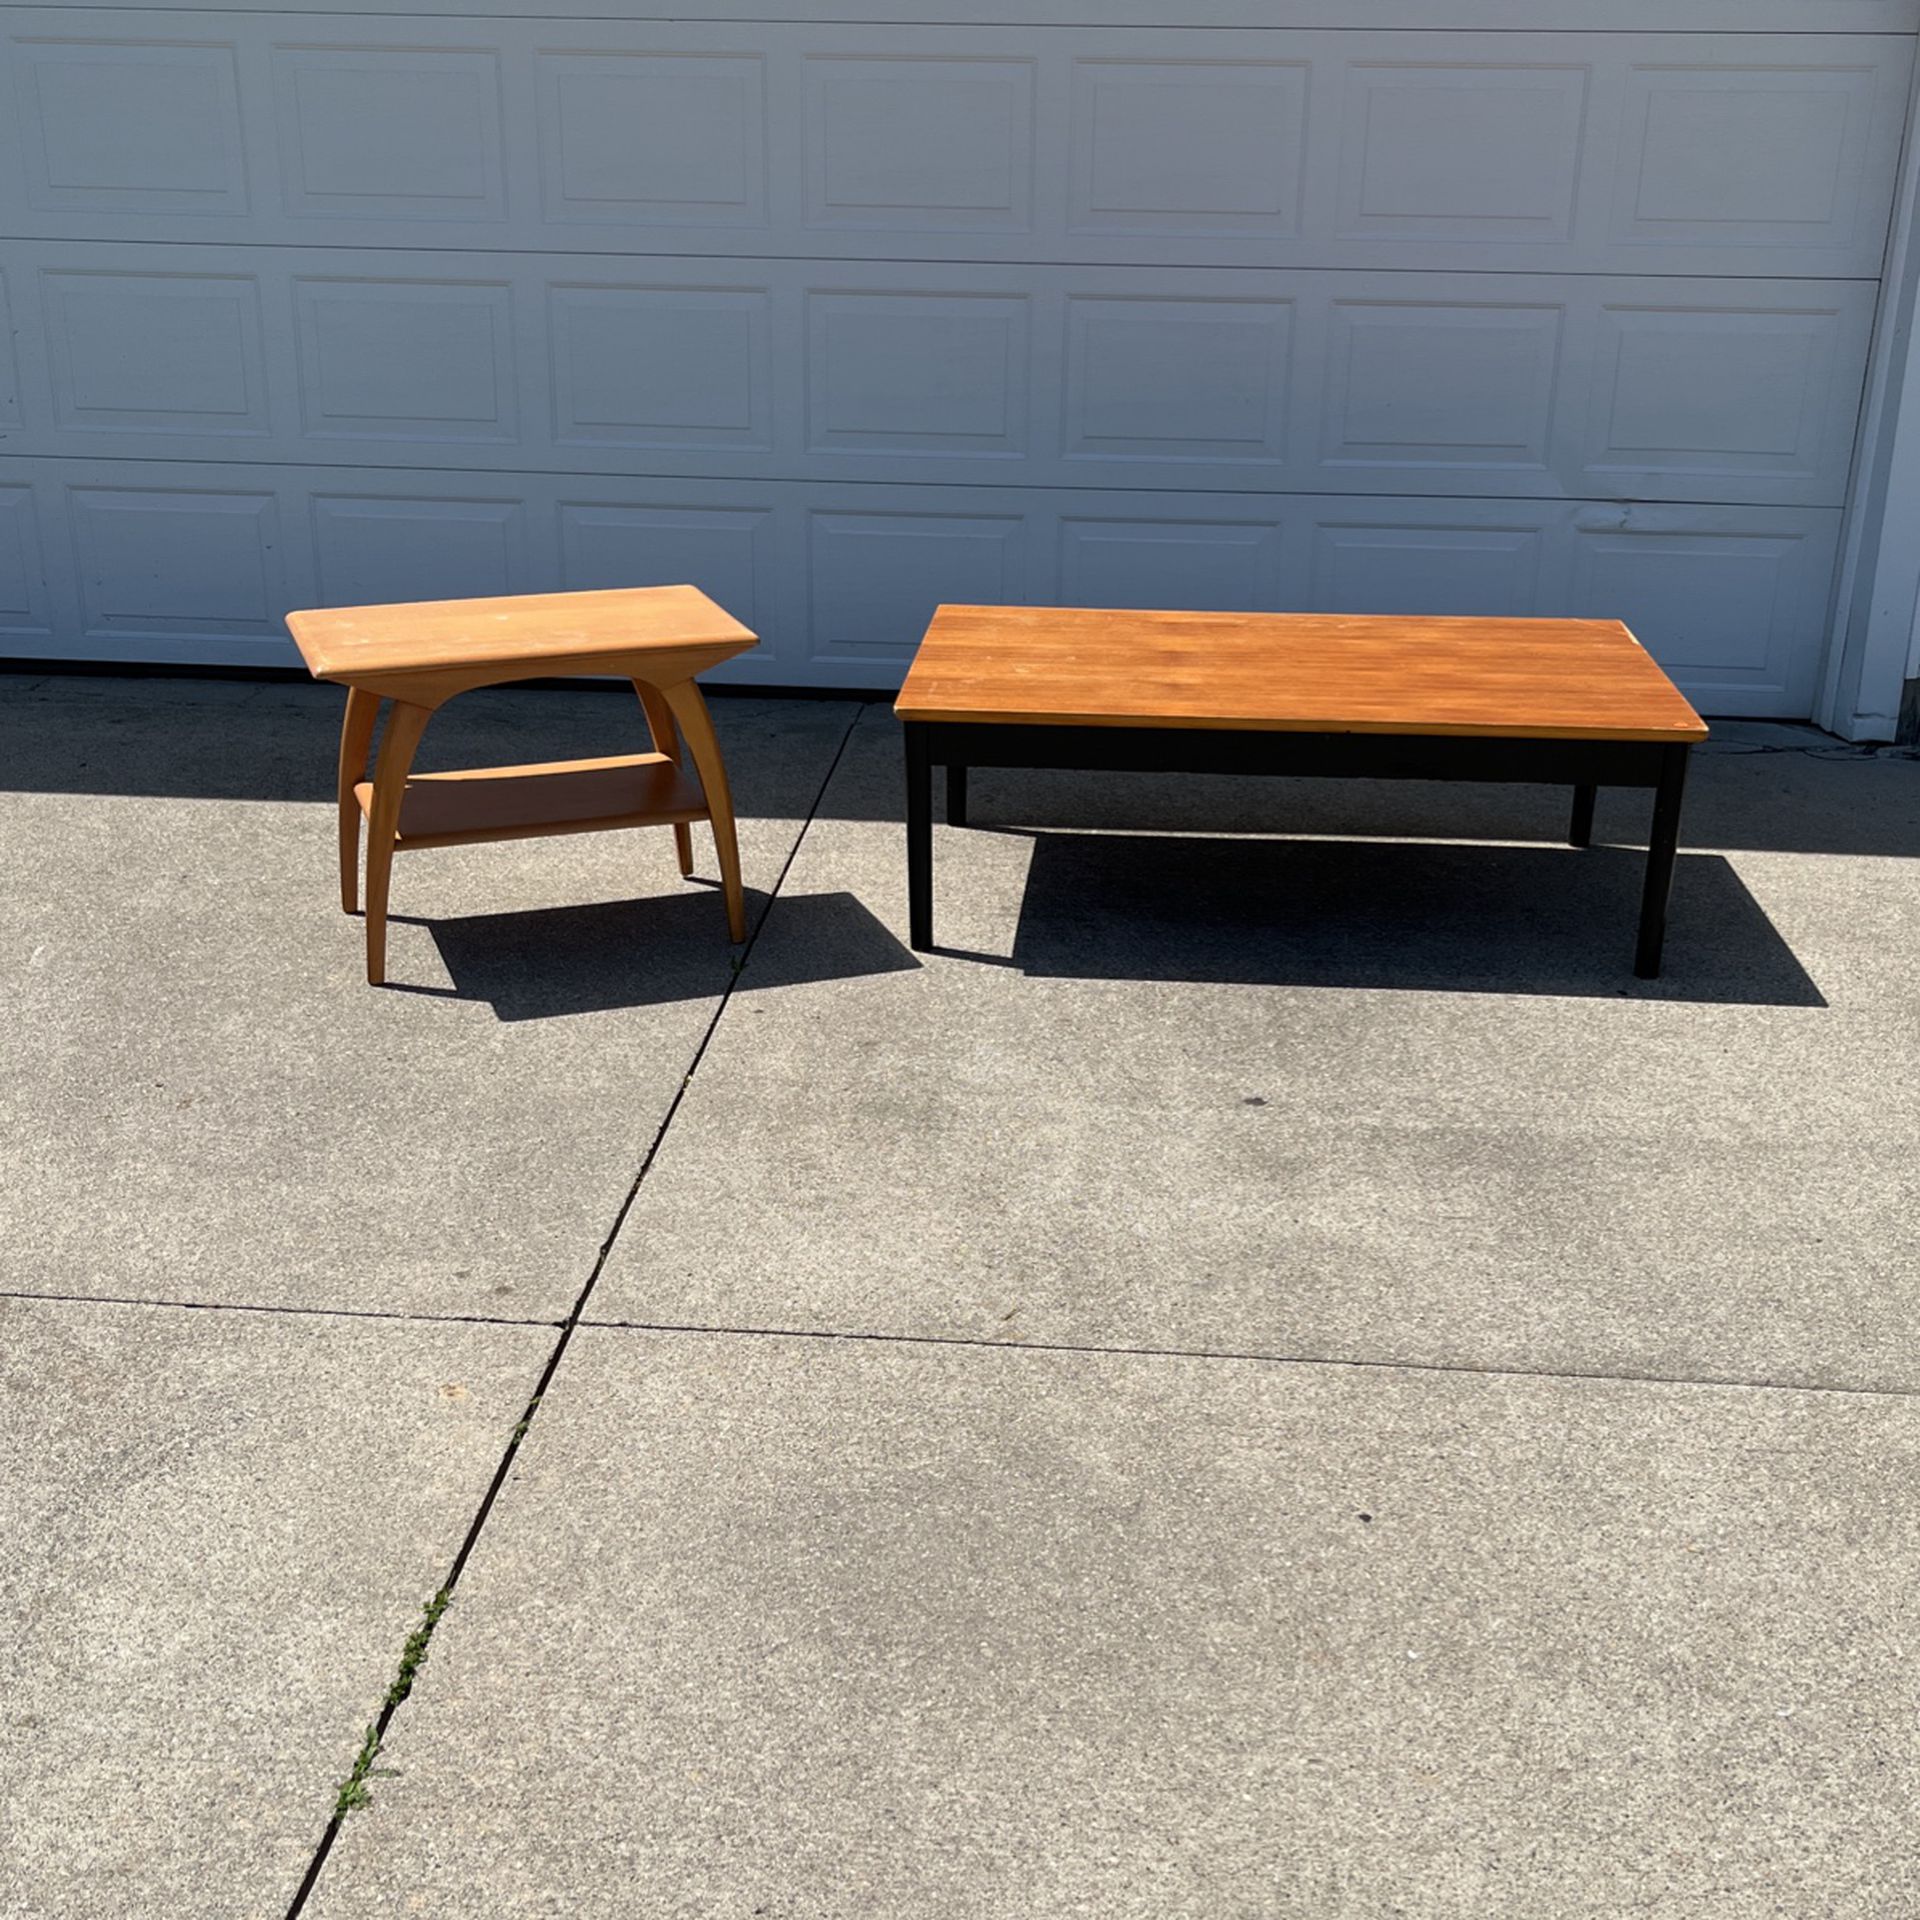 Heywood Wakefield Coffee Table $100 And Unmarked Coffee Table